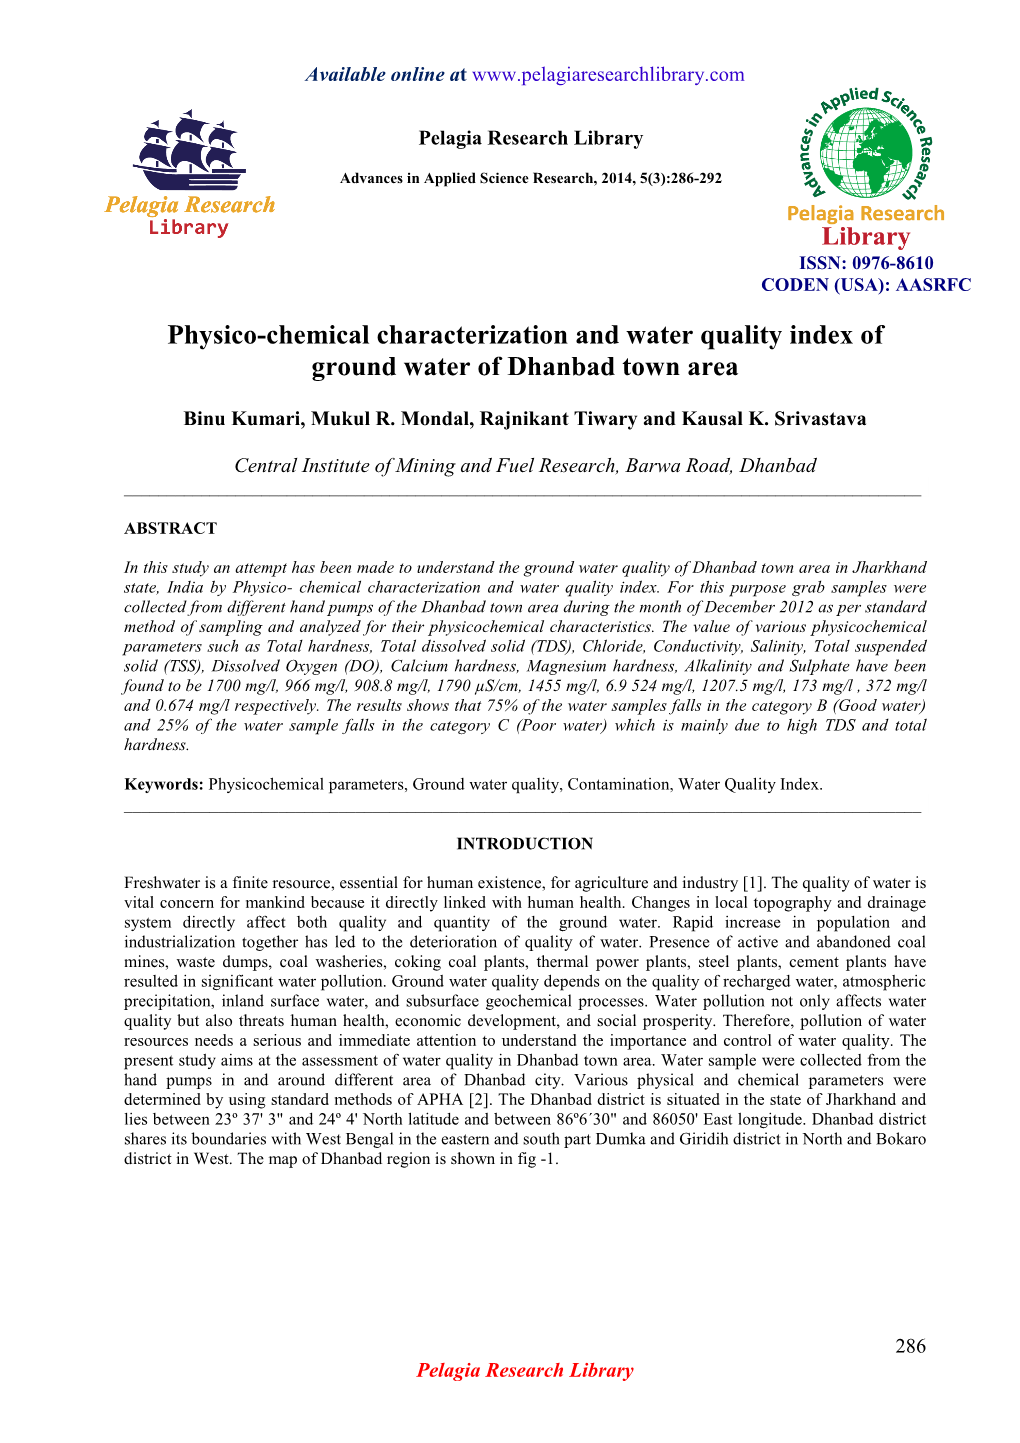 Physico-Chemical Characterization and Water Quality Index of Ground Water of Dhanbad Town Area